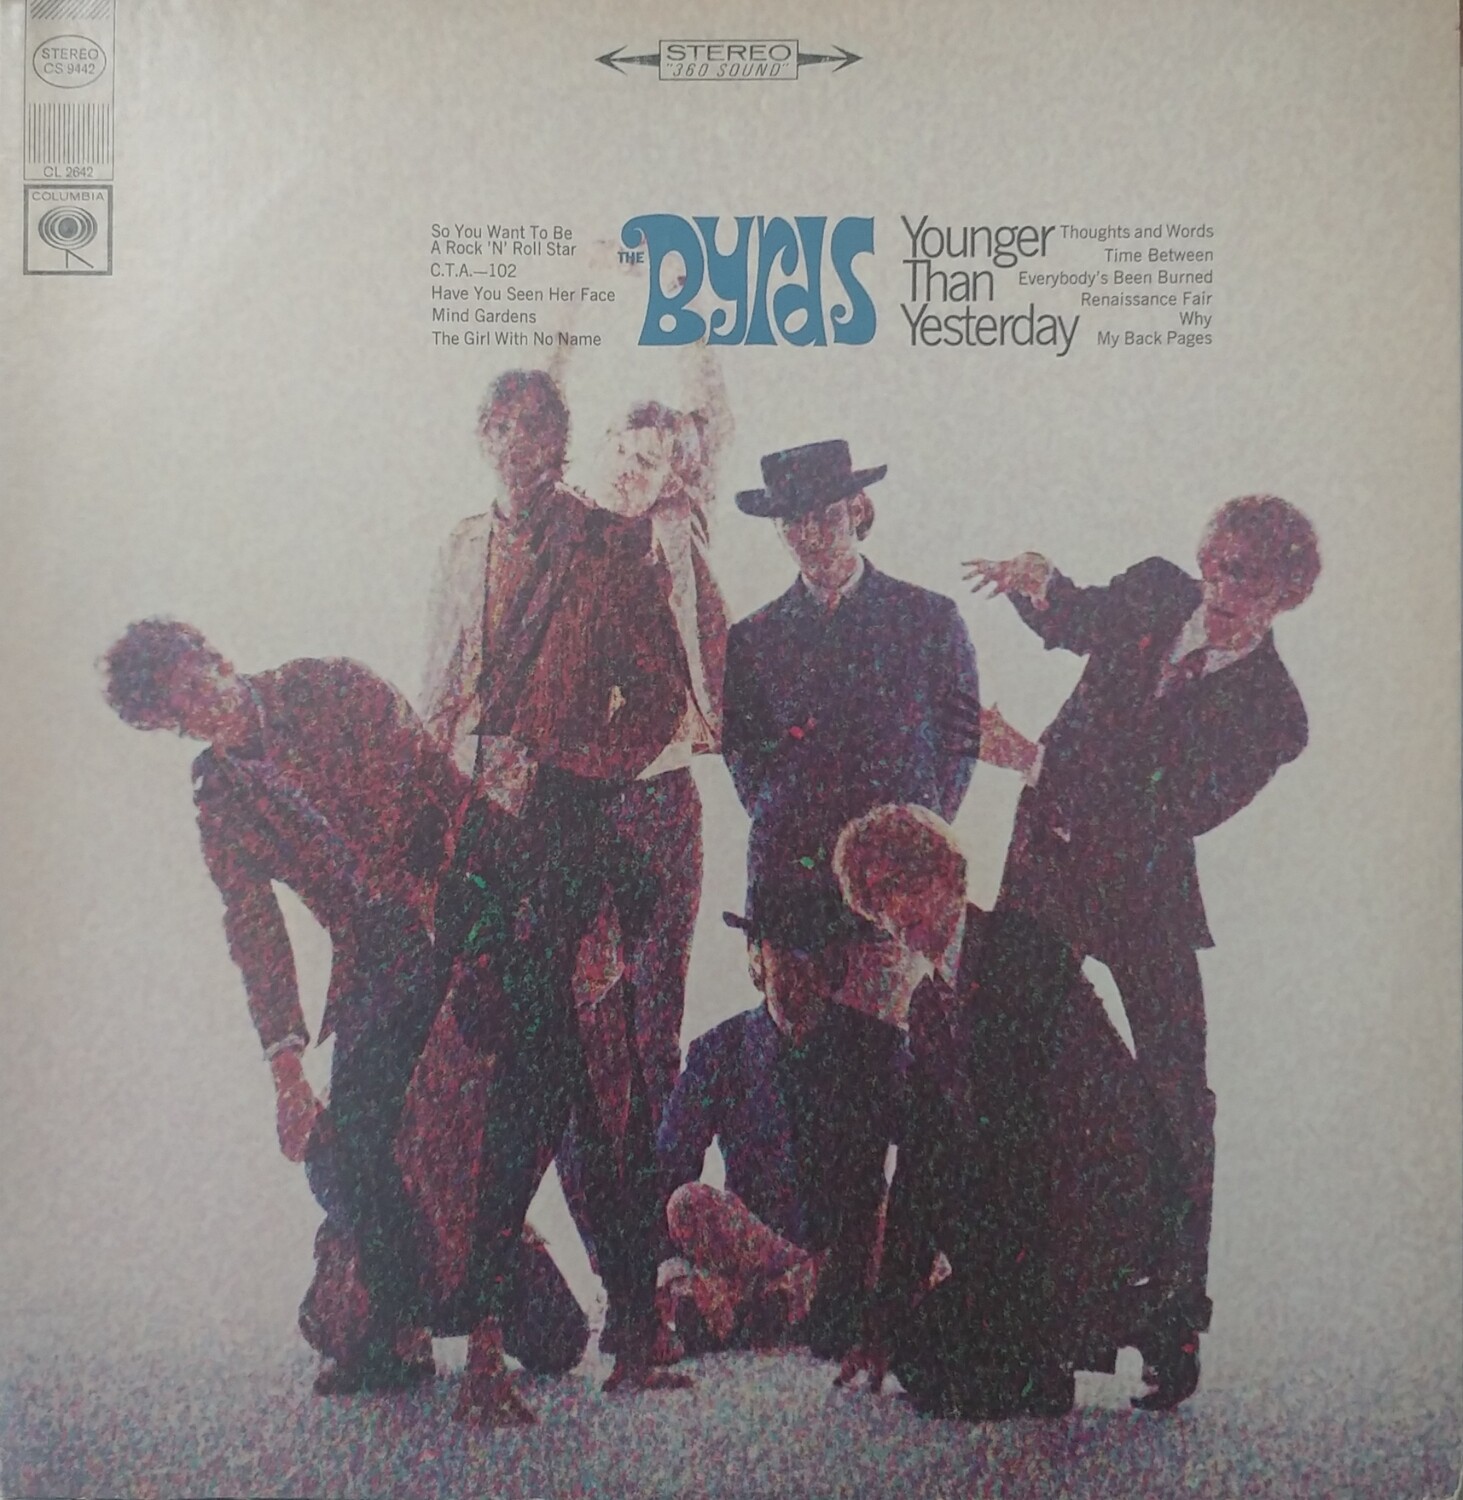 The Byrds - Younger than yesterday